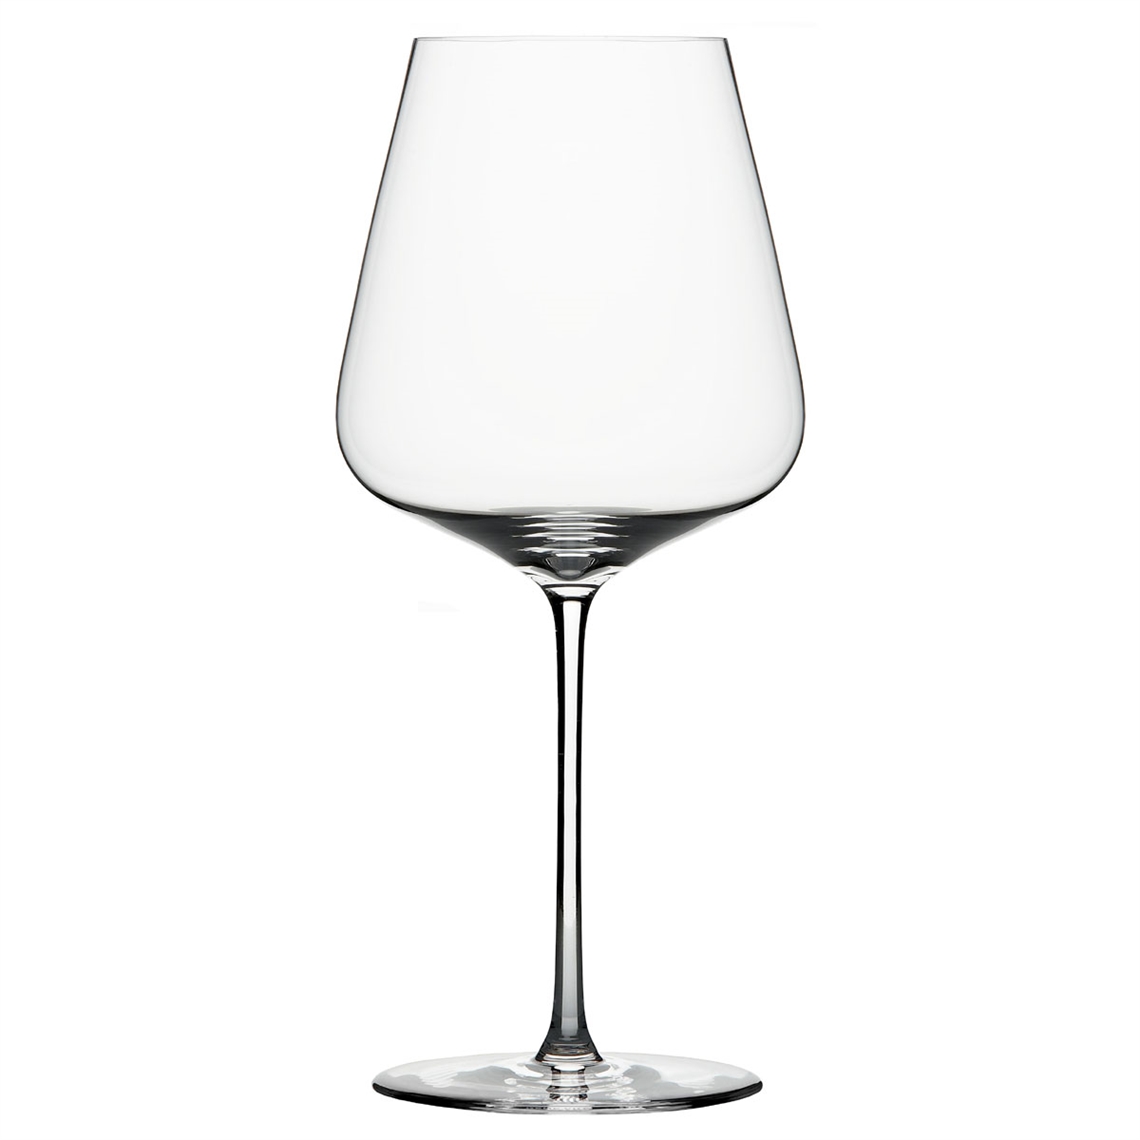 View more large wine glasses from our Premium Mouth Blown Glassware range